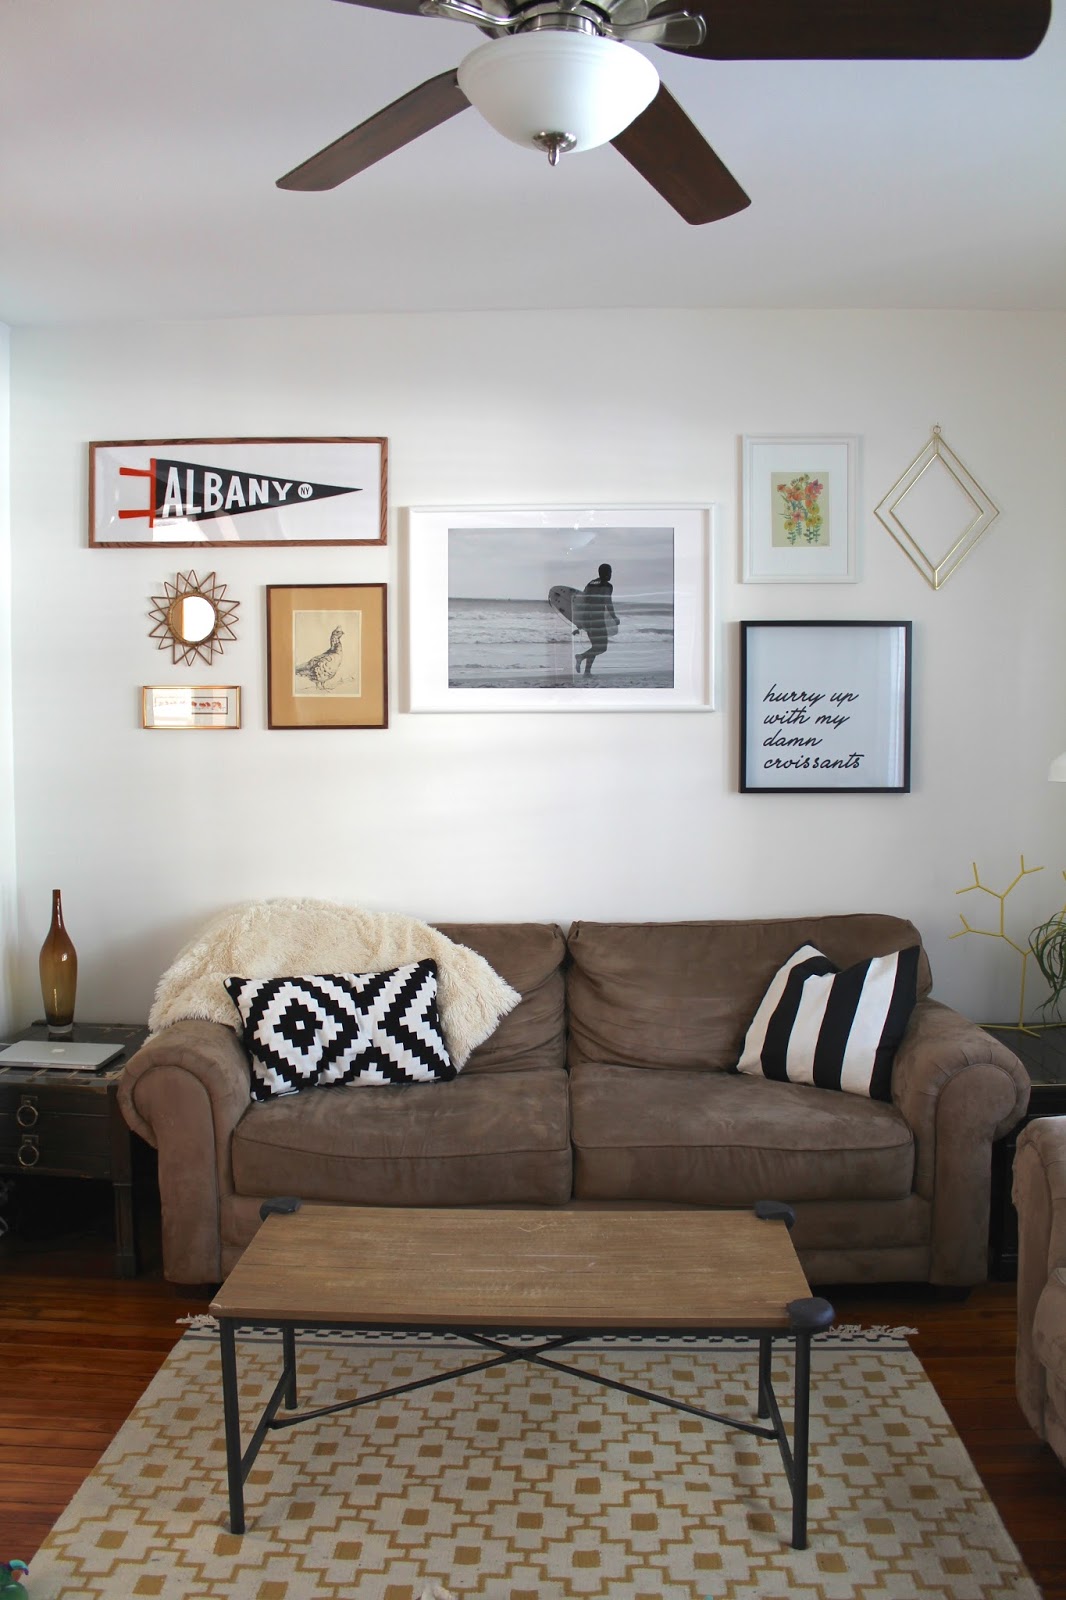 Marissa Says... | A Lifestyle Blog: My living room statement wall